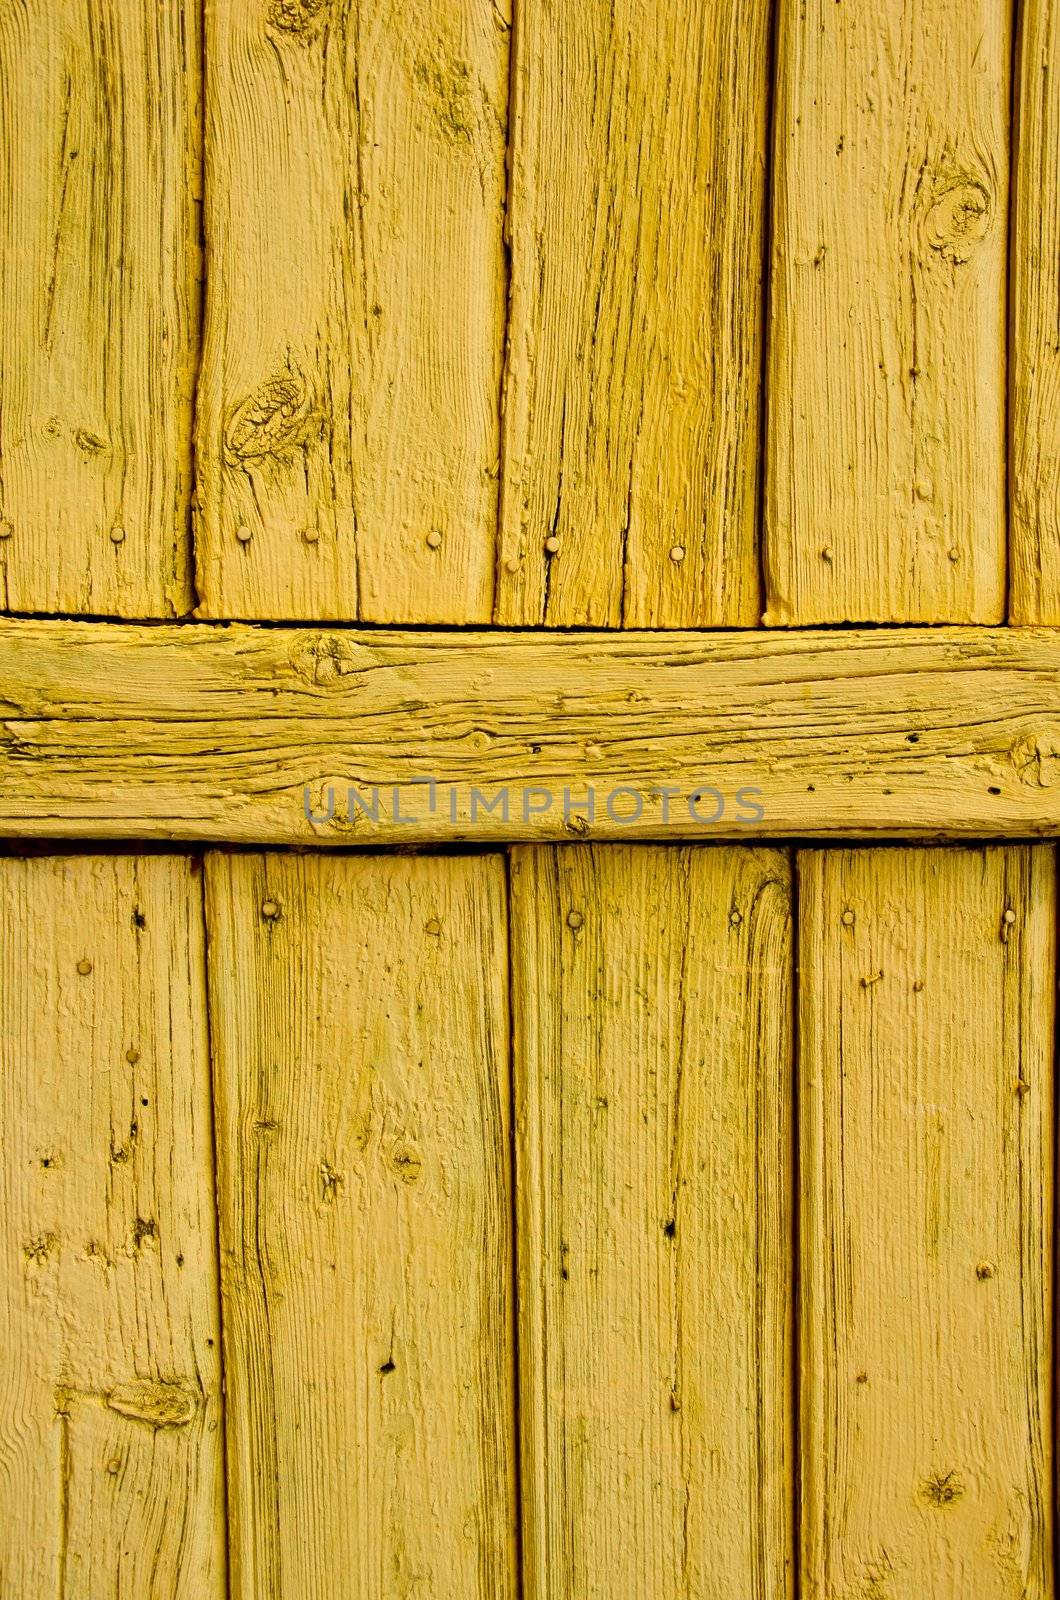 Old wooden painted wall architectural backdrop. Nails and old boards.